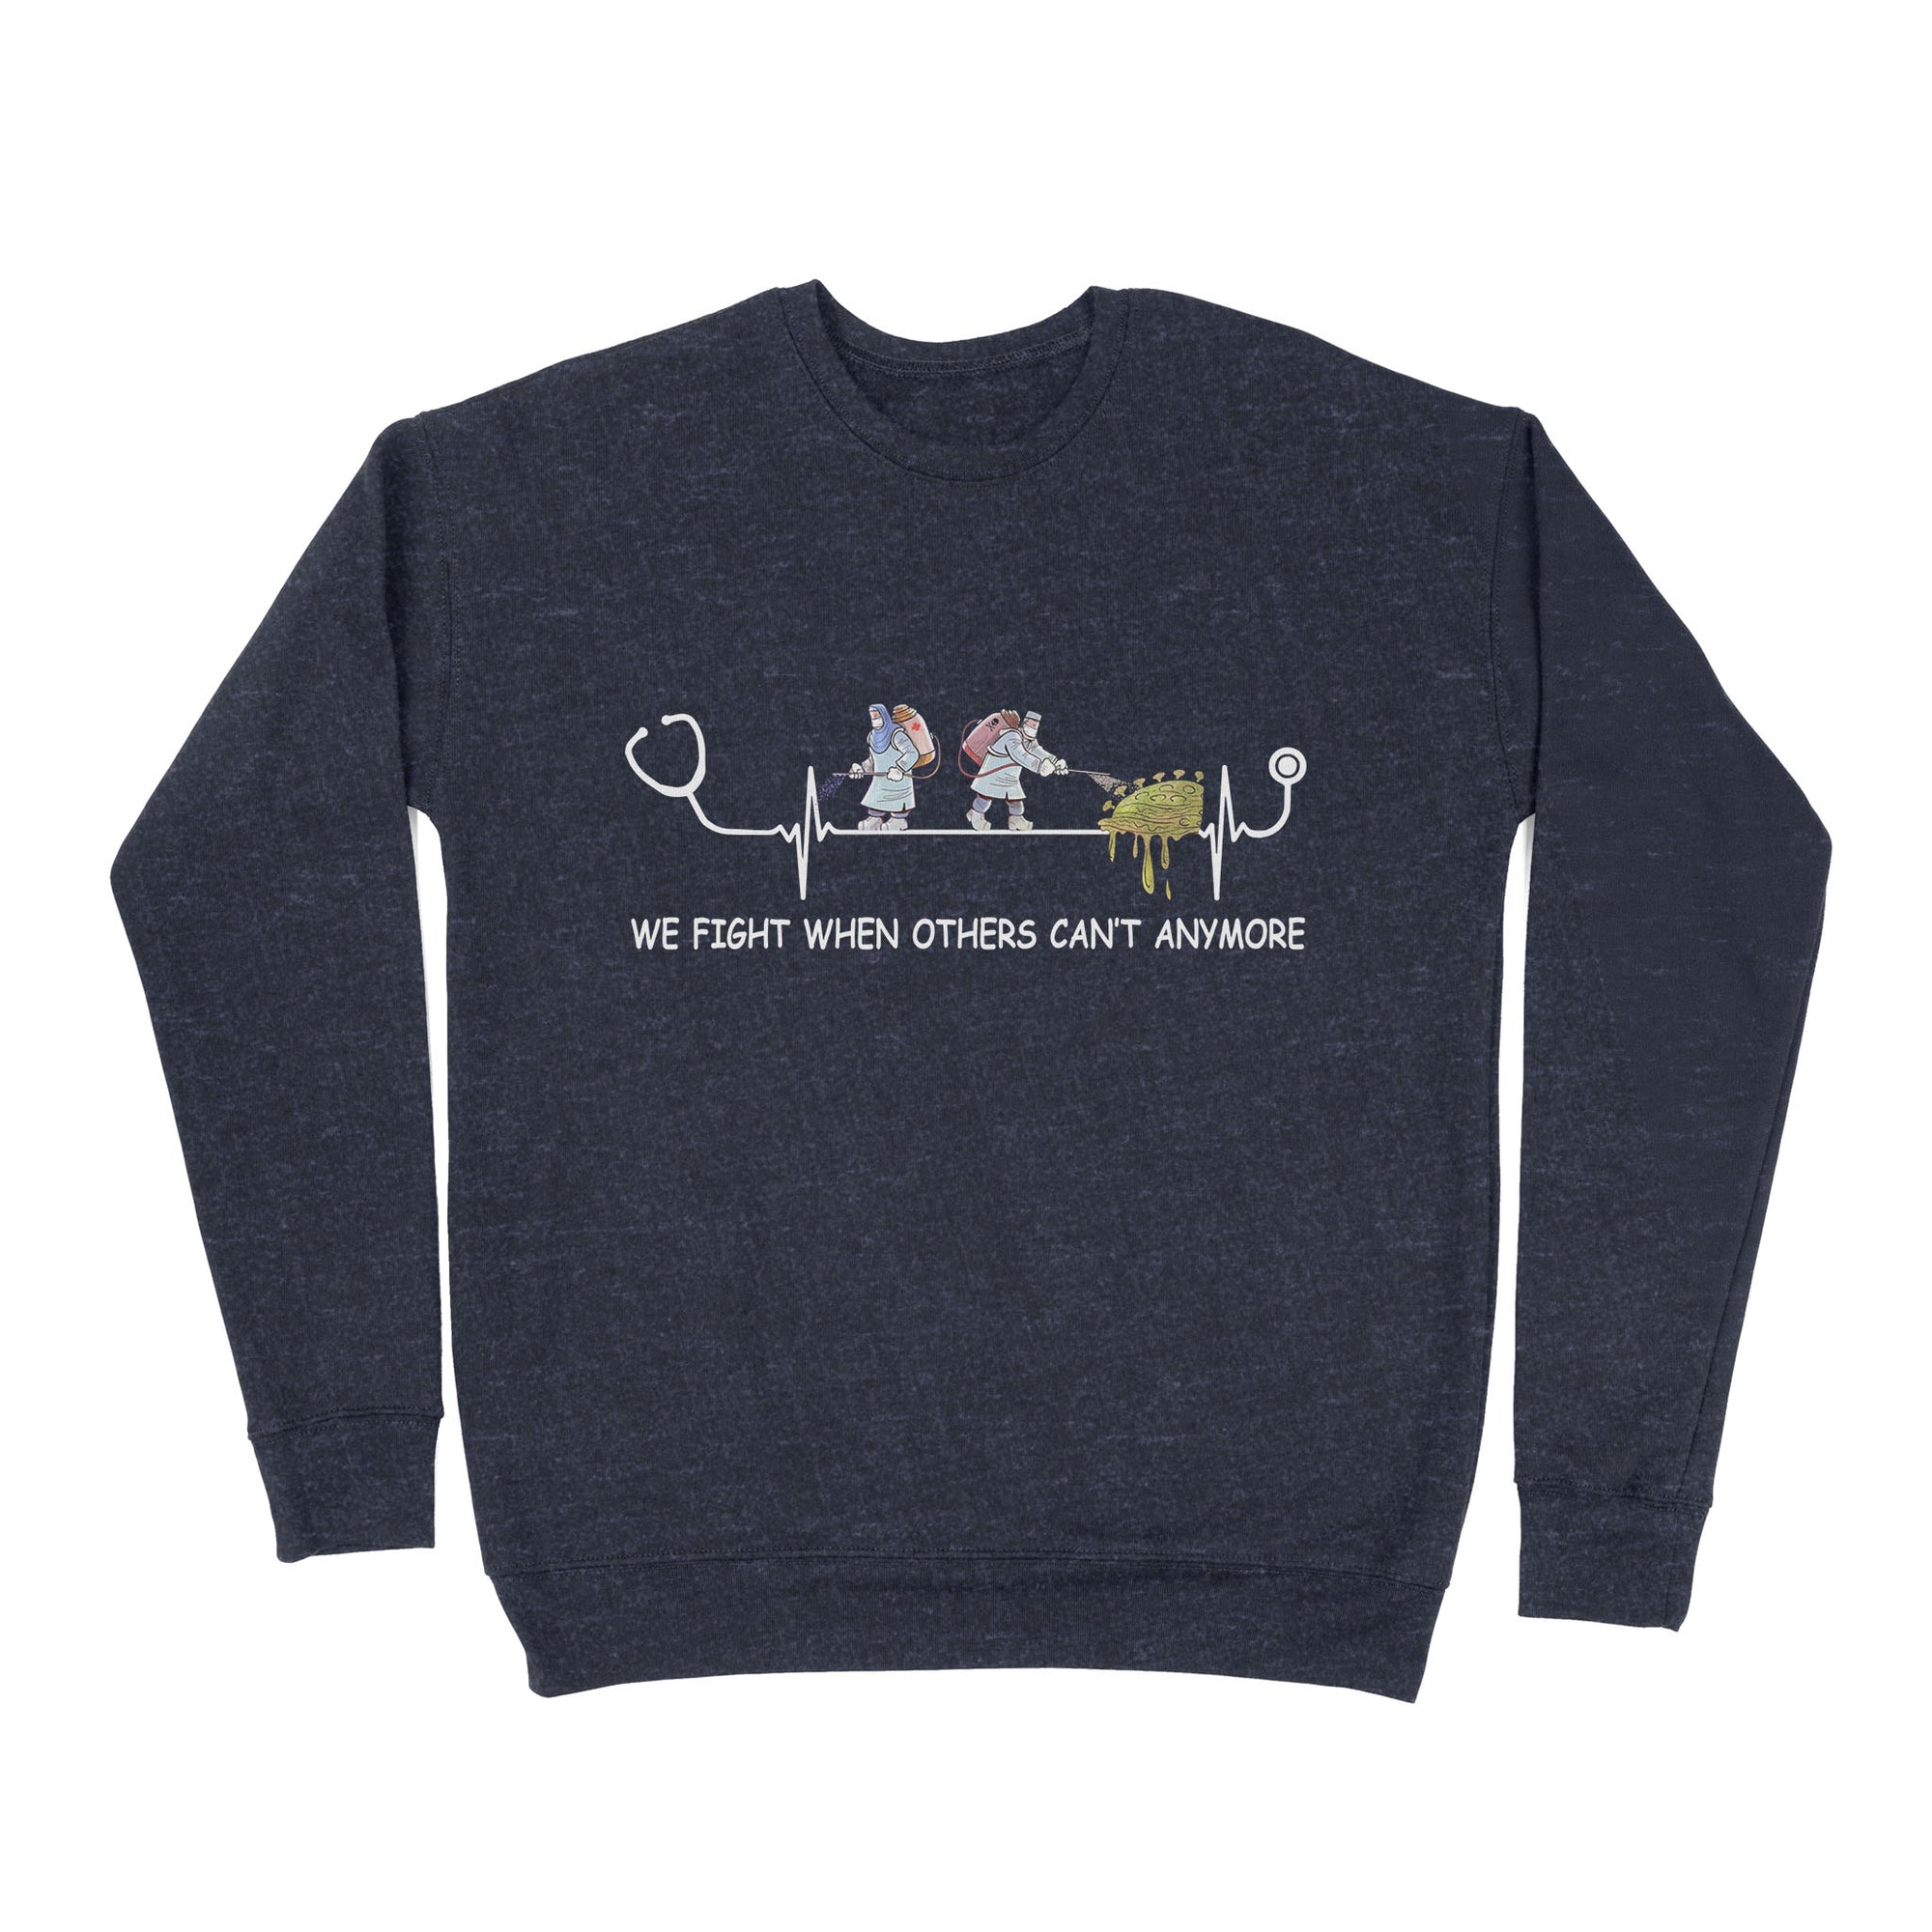 We Fight When Others Can’t Anymore Nurse - Premium Crew Neck Sweatshirt